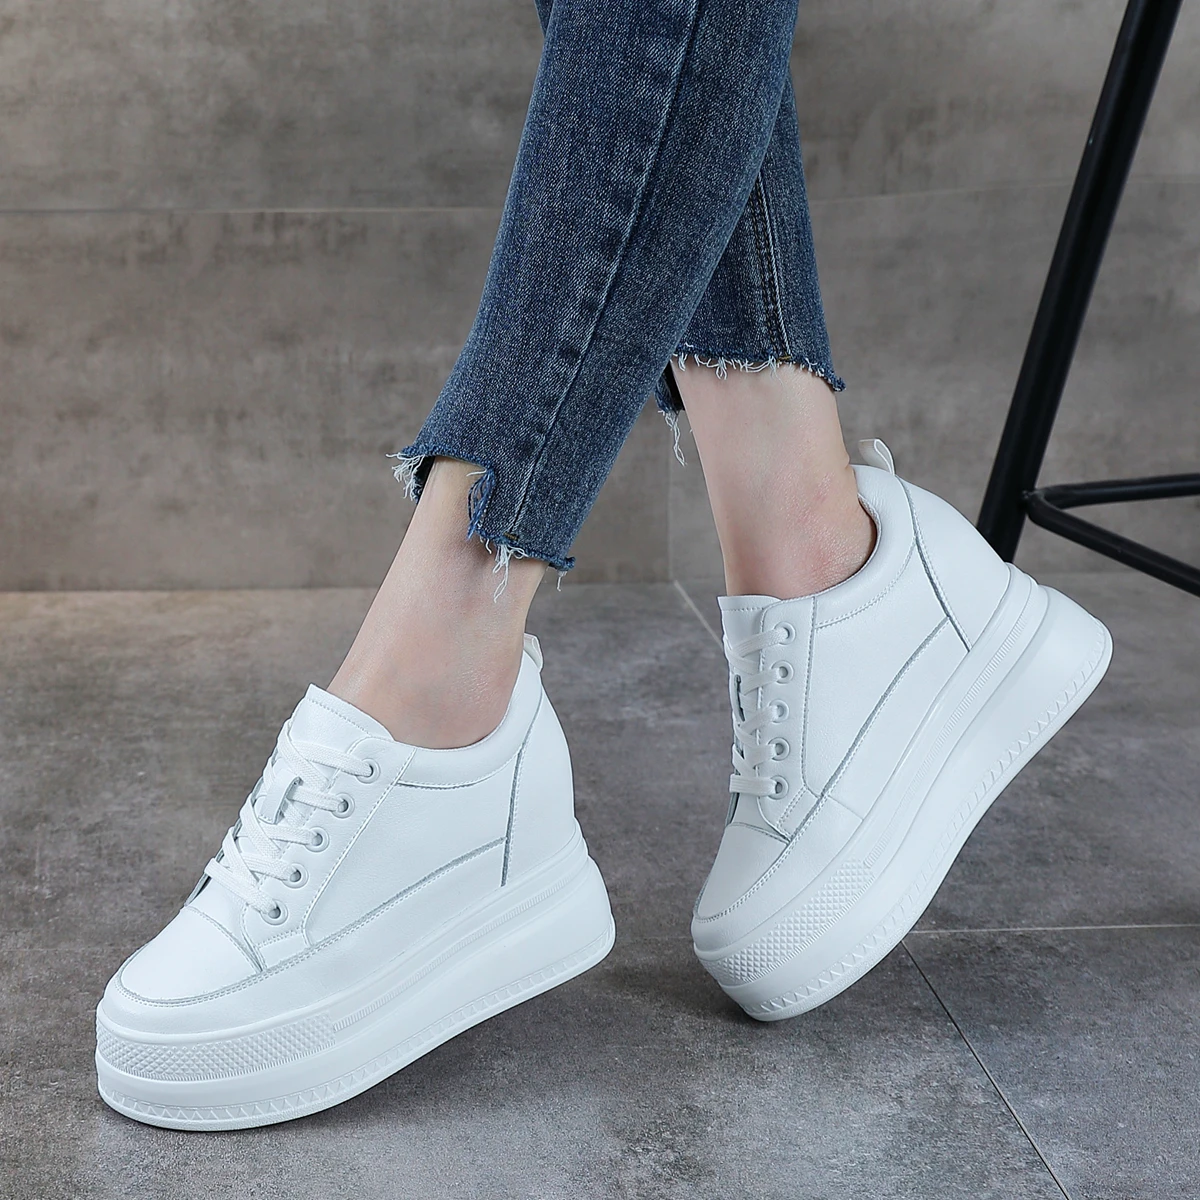 Step It Up Faux Leather Wedge Sneakers | Shoes women heels, Wedge heel  sneakers, Shoes heels wedges